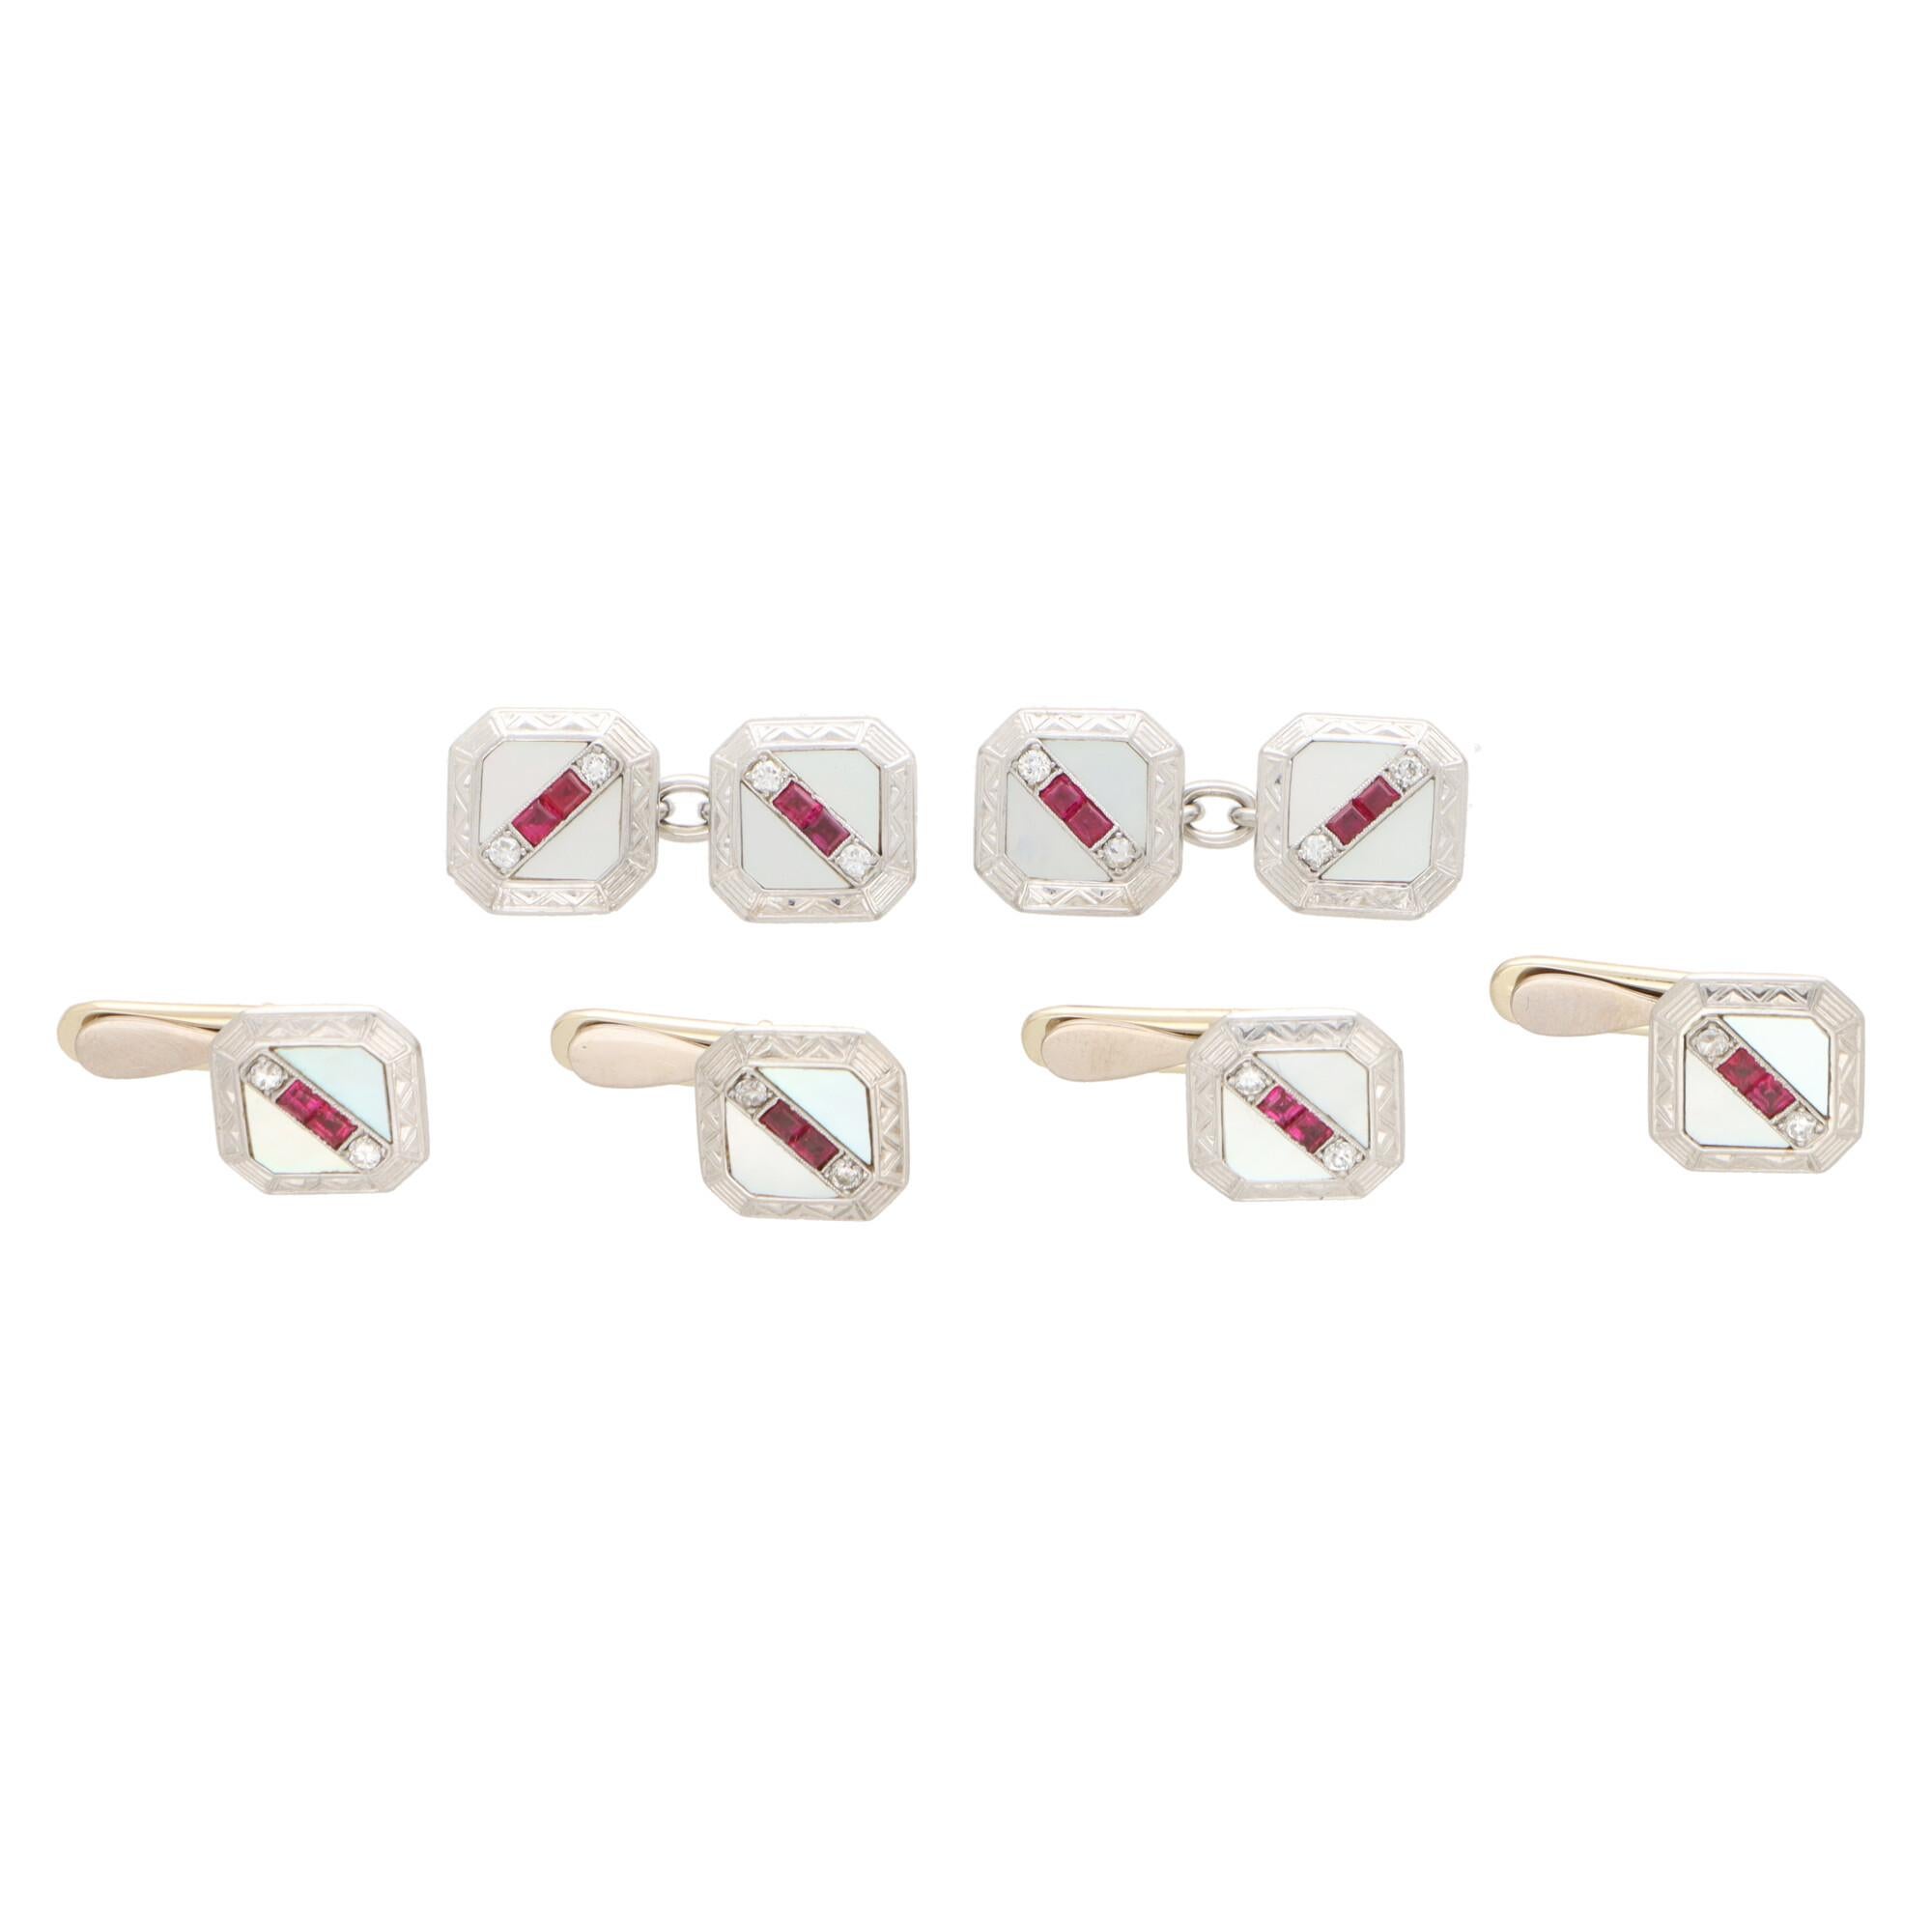 A beautiful Art Deco cufflink and shirt stud dress set, set with diamonds, rubies and mother of pearl.  

The set is comprised of four beautifully crafted shirt studs and a pair of perfectly matched double-sided chain-link cufflinks.

Each square